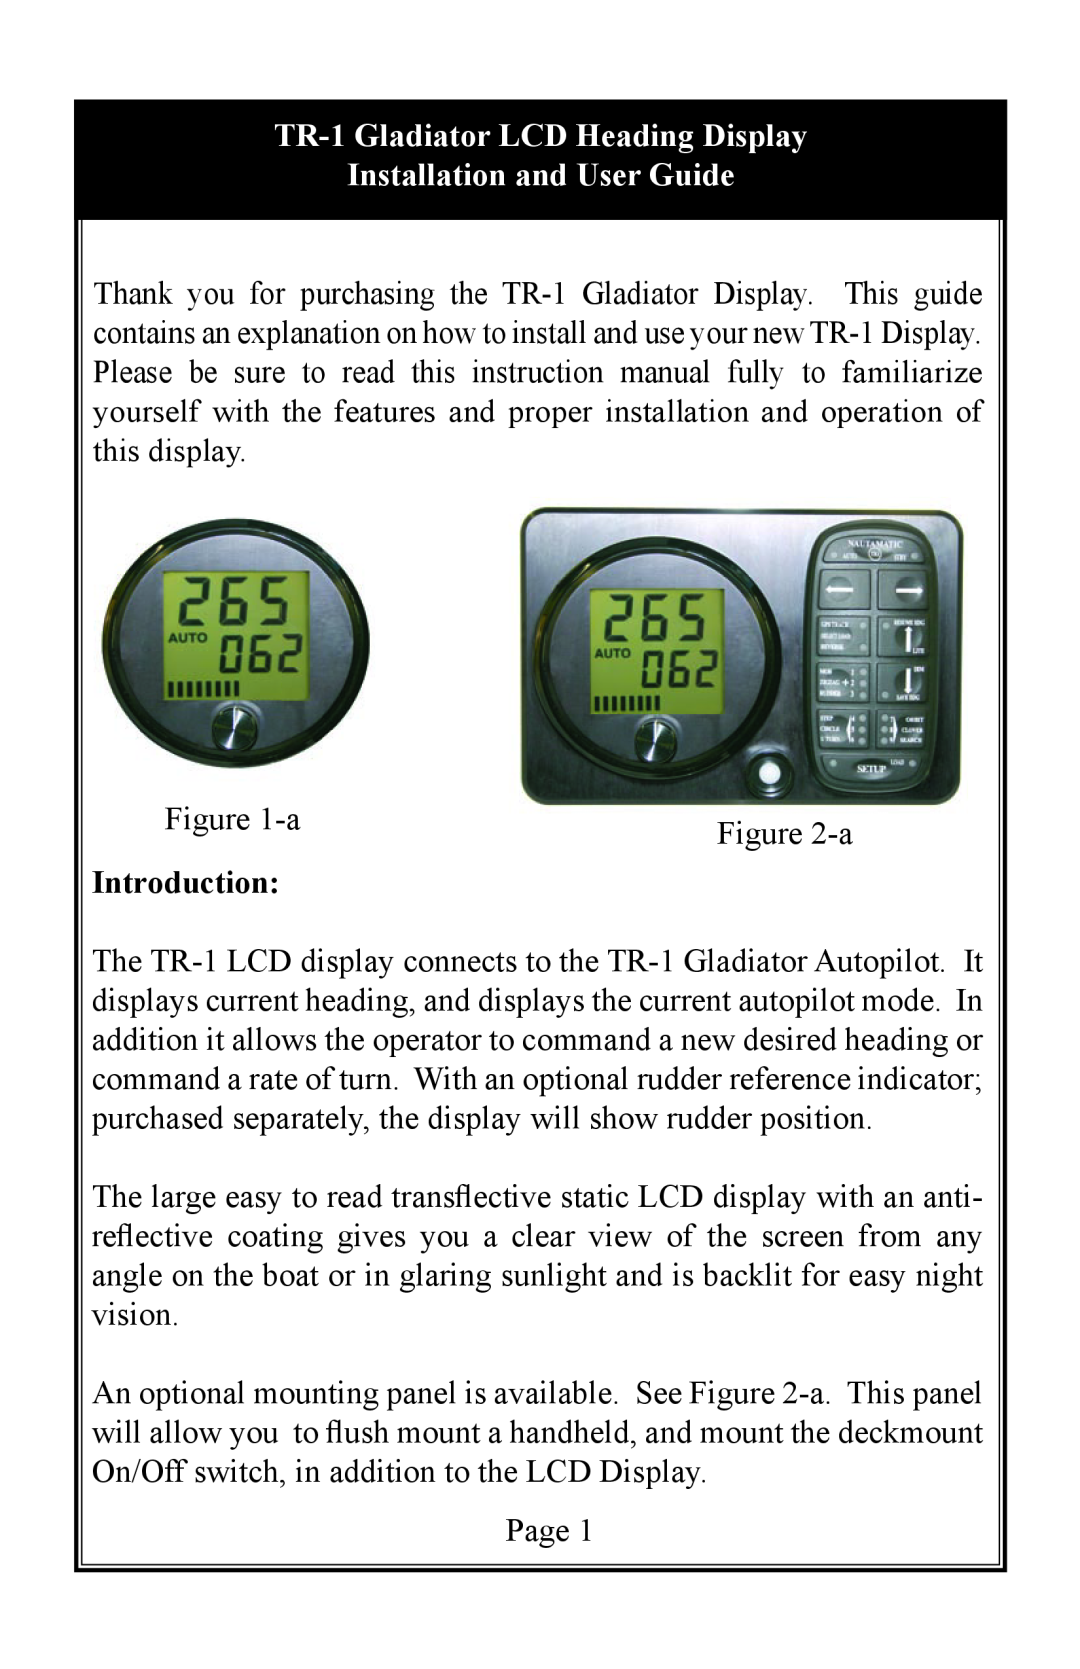 Garmin owner manual Introduction, TR-1 Gladiator LCD Heading Display Installation and User Guide 